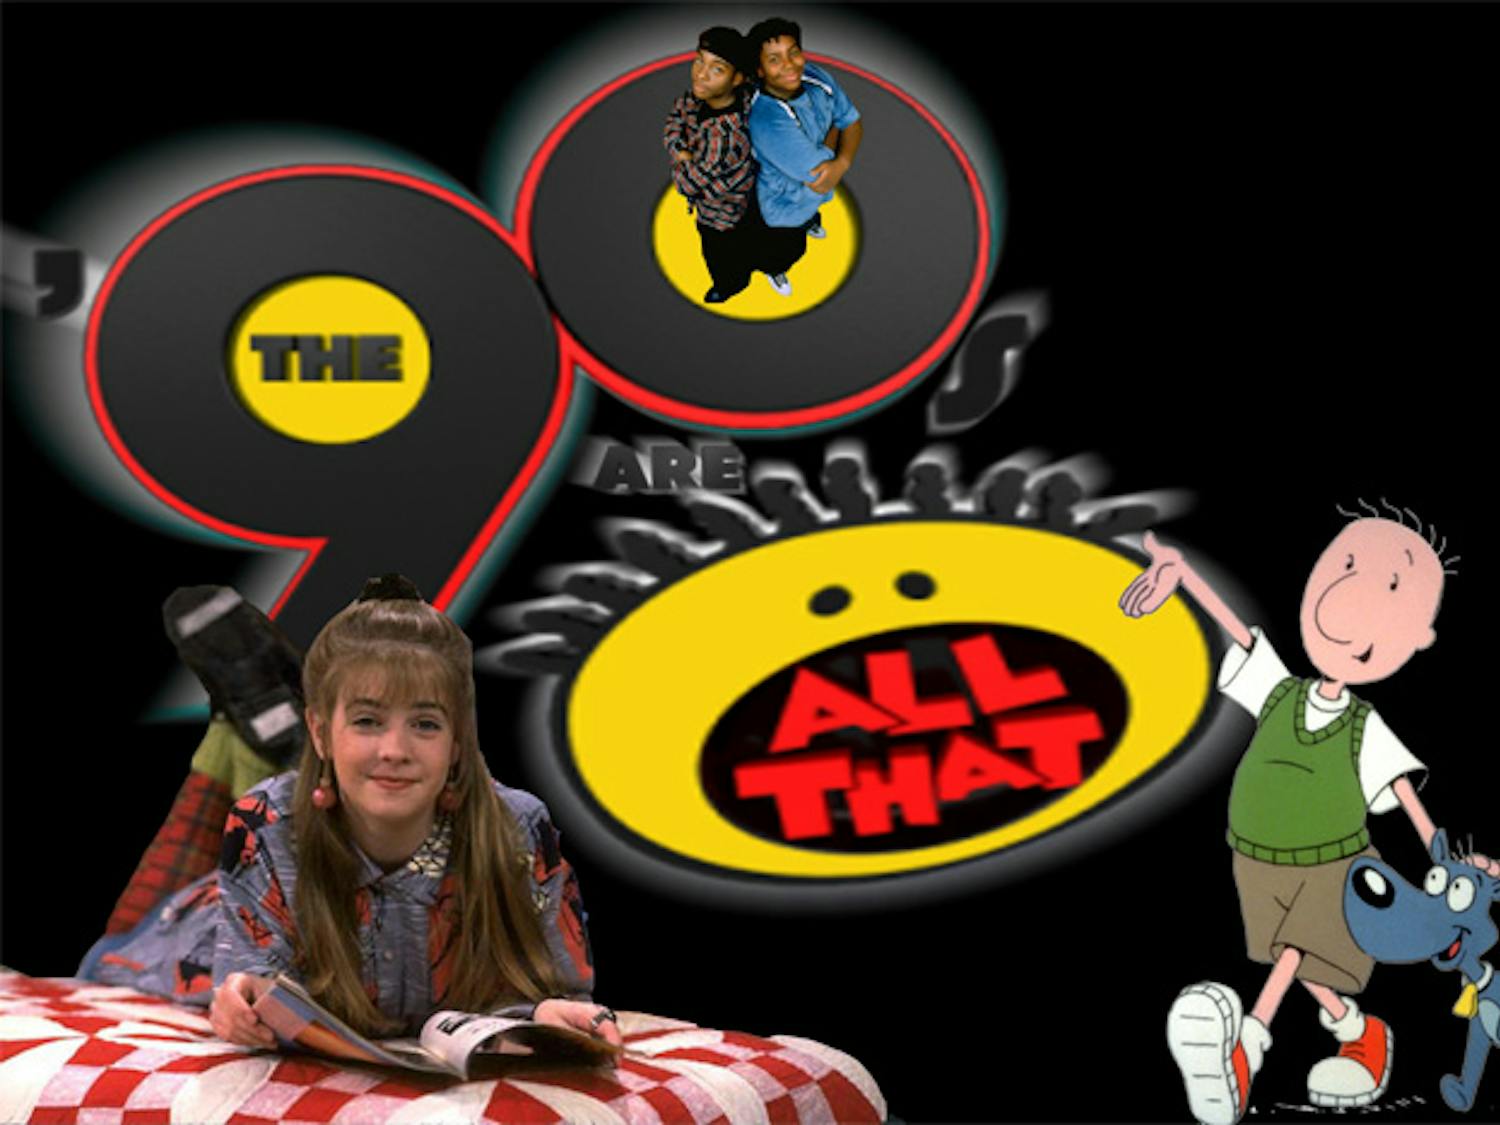 When Nickelodeon realized how many young adults craved a second childhood, it delivered in a big way. Last week, TeenNick began airing a block entitled The ‘90s Are All That from midnight to 2 a.m. on weeknights. Airing four shows every night, the block was in response to an overwhelming demand online from 18- to 34-year-olds who wanted to rewatch the TV shows they grew up with. Nickelodeon has made excellent use of social media in the project, discovering that 15 million Facebook fans wanted their ‘90s Nick shows back. The four shows pictured are “All That,” “Kenan and Kel,” “Clarissa Explains It All” and “Doug.”